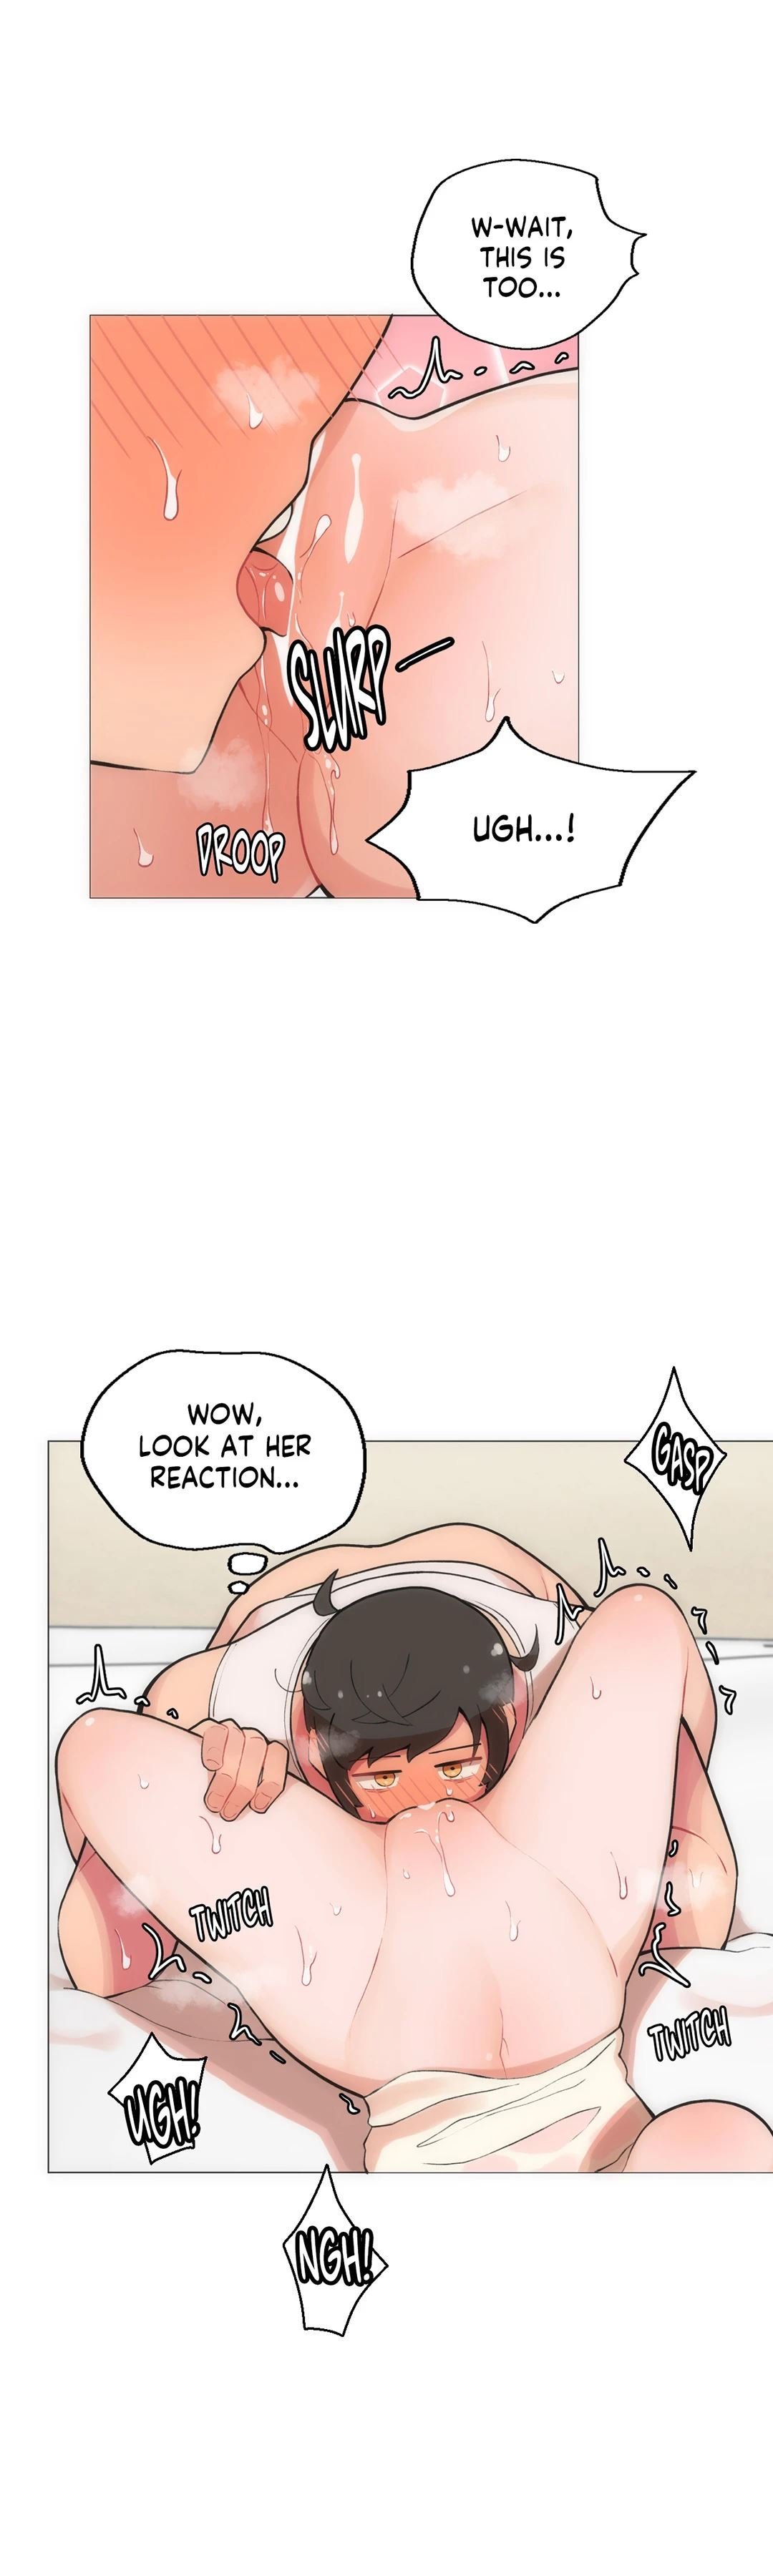 sexcape-room-good-game-chap-3-27